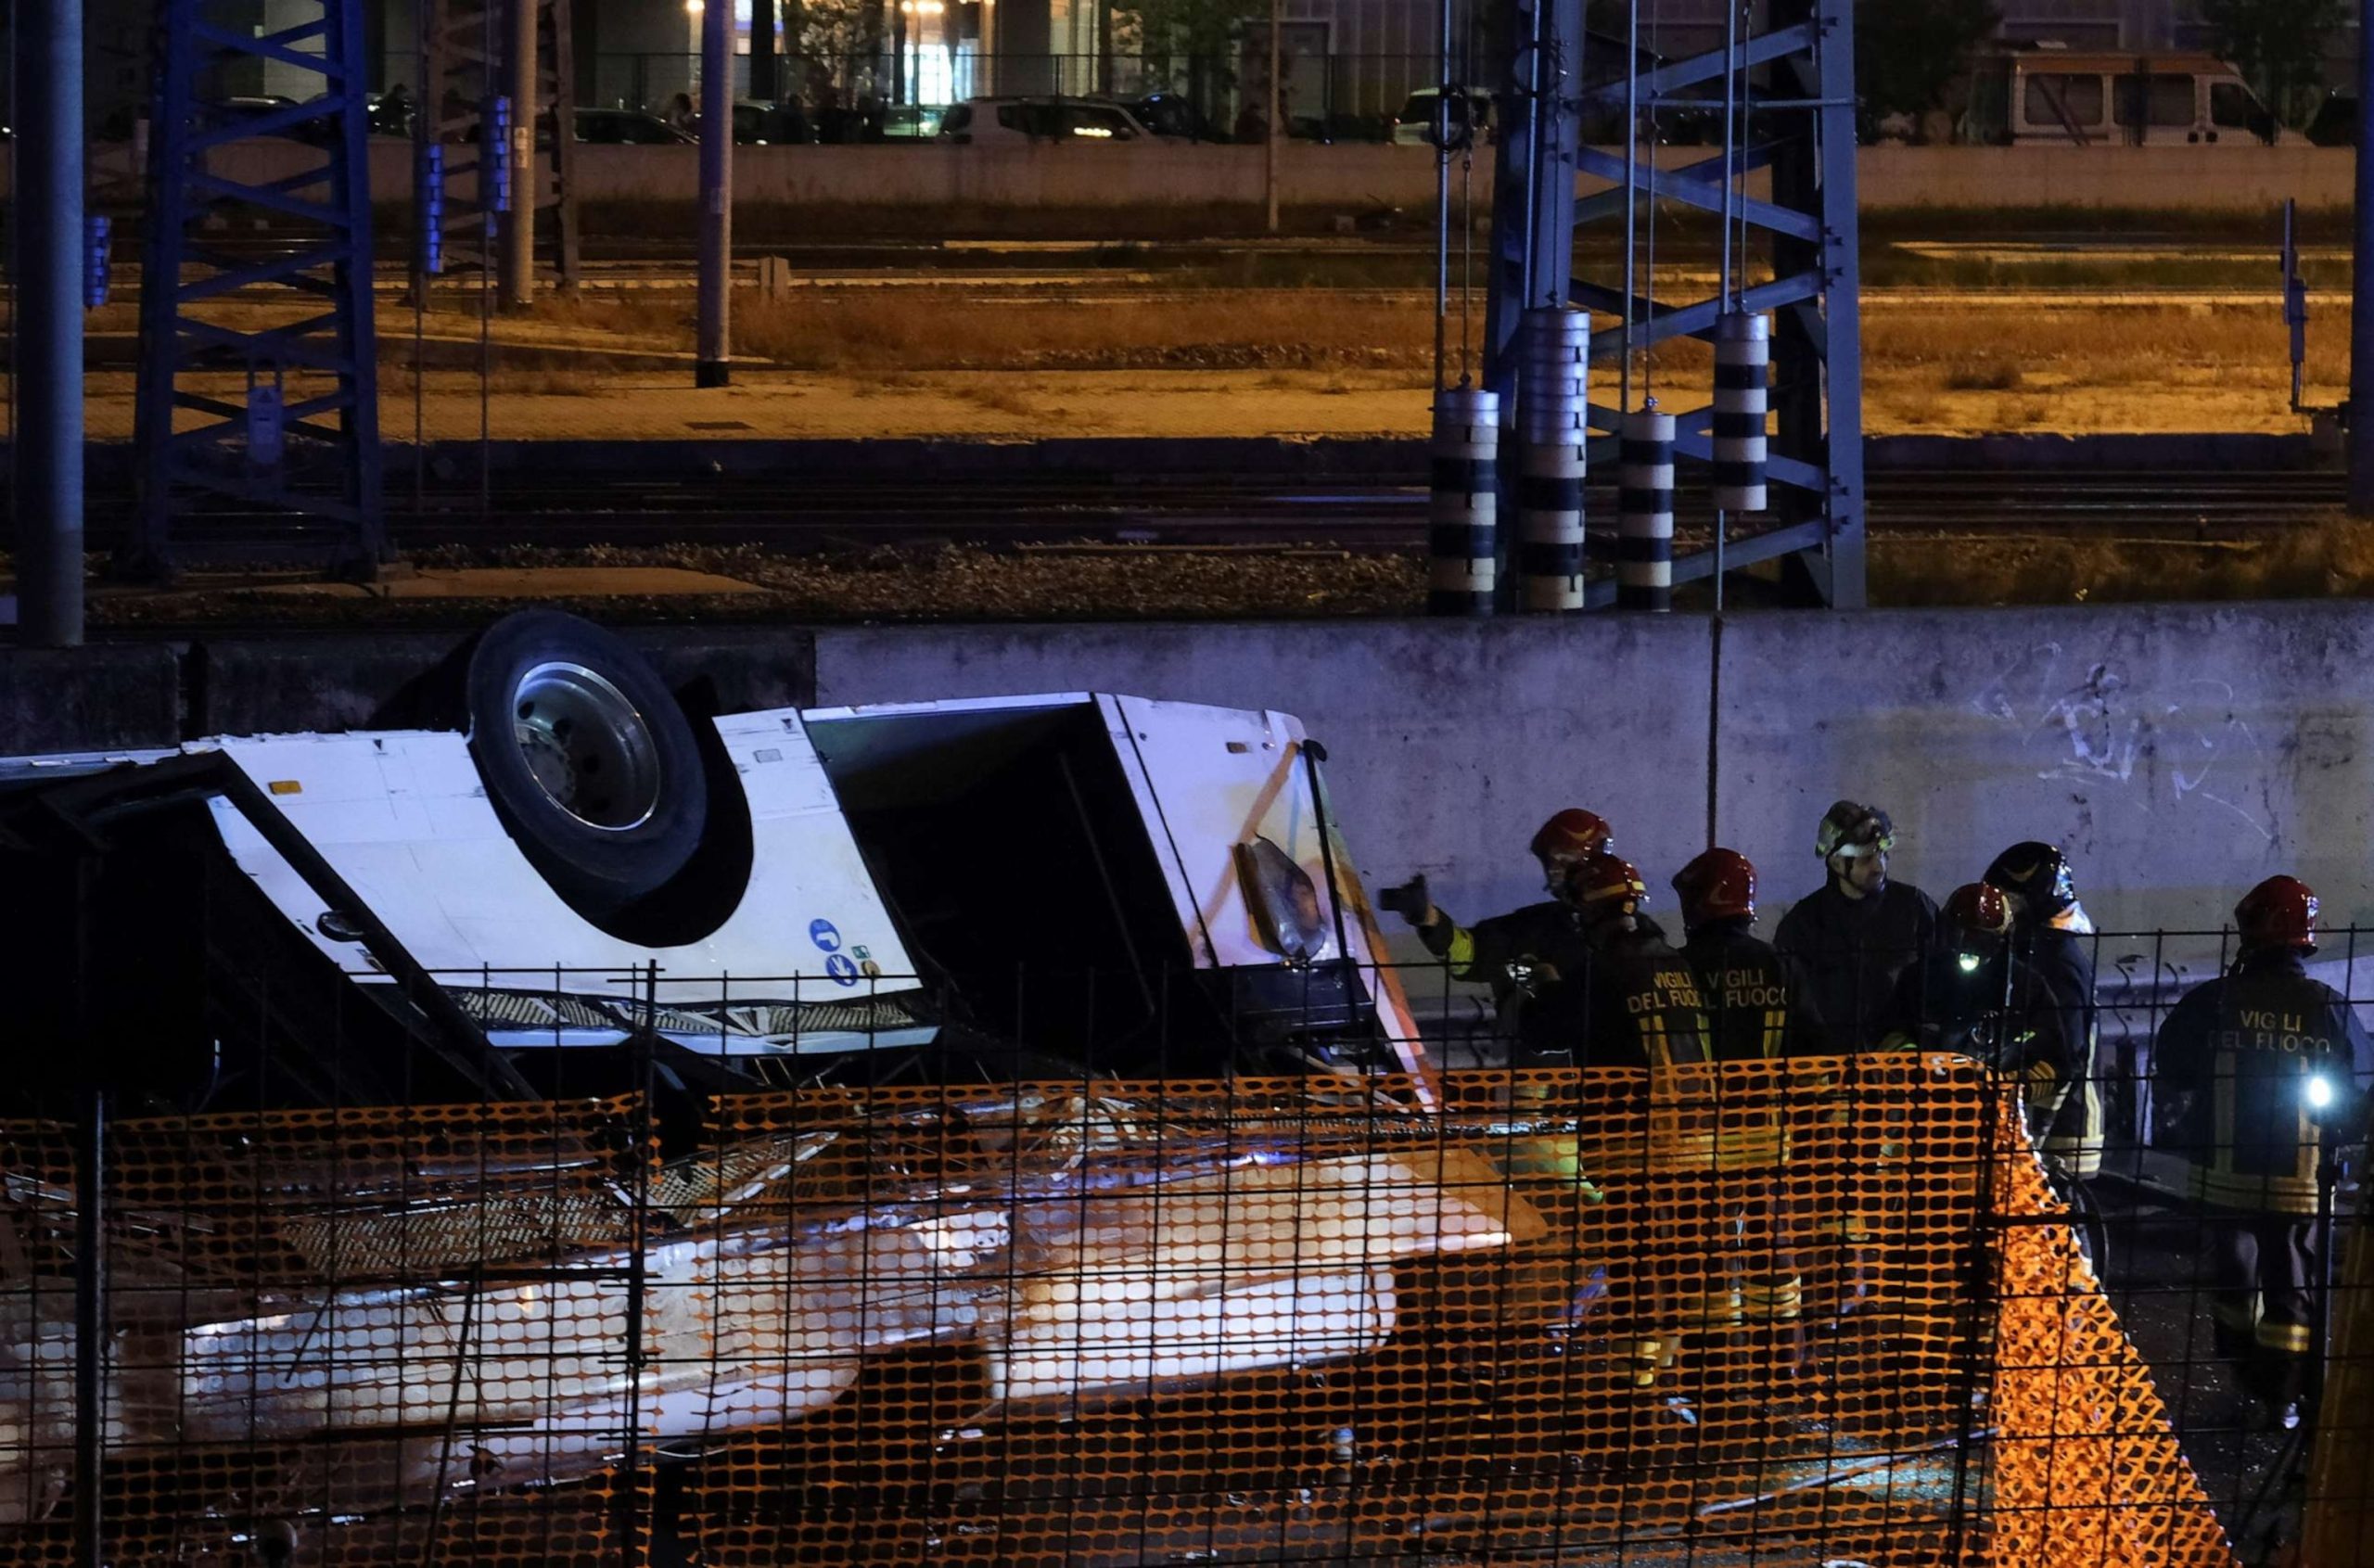 Tragic Incident near Venice, Italy: Bus Plunges off Overpass, Resulting in 21 Fatalities and 18 Injuries